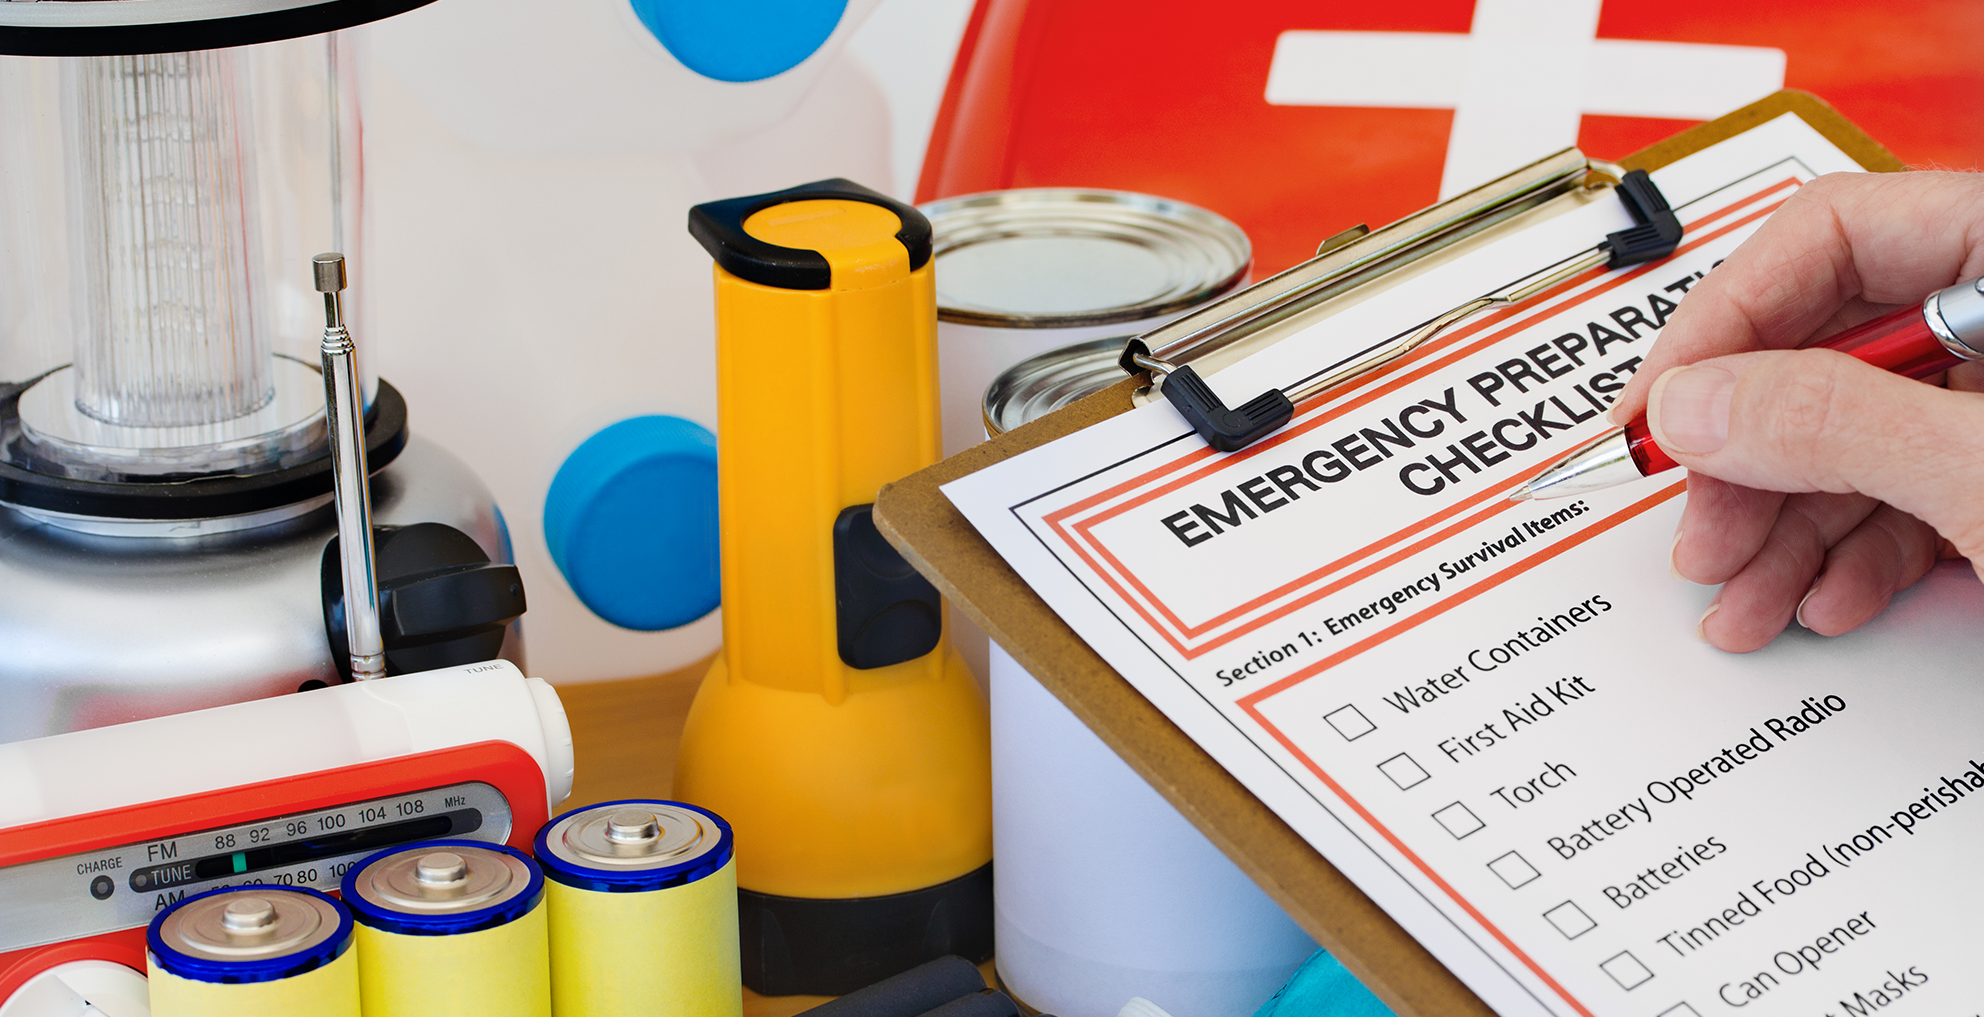 Preparing for emergencies with checklist and supplies